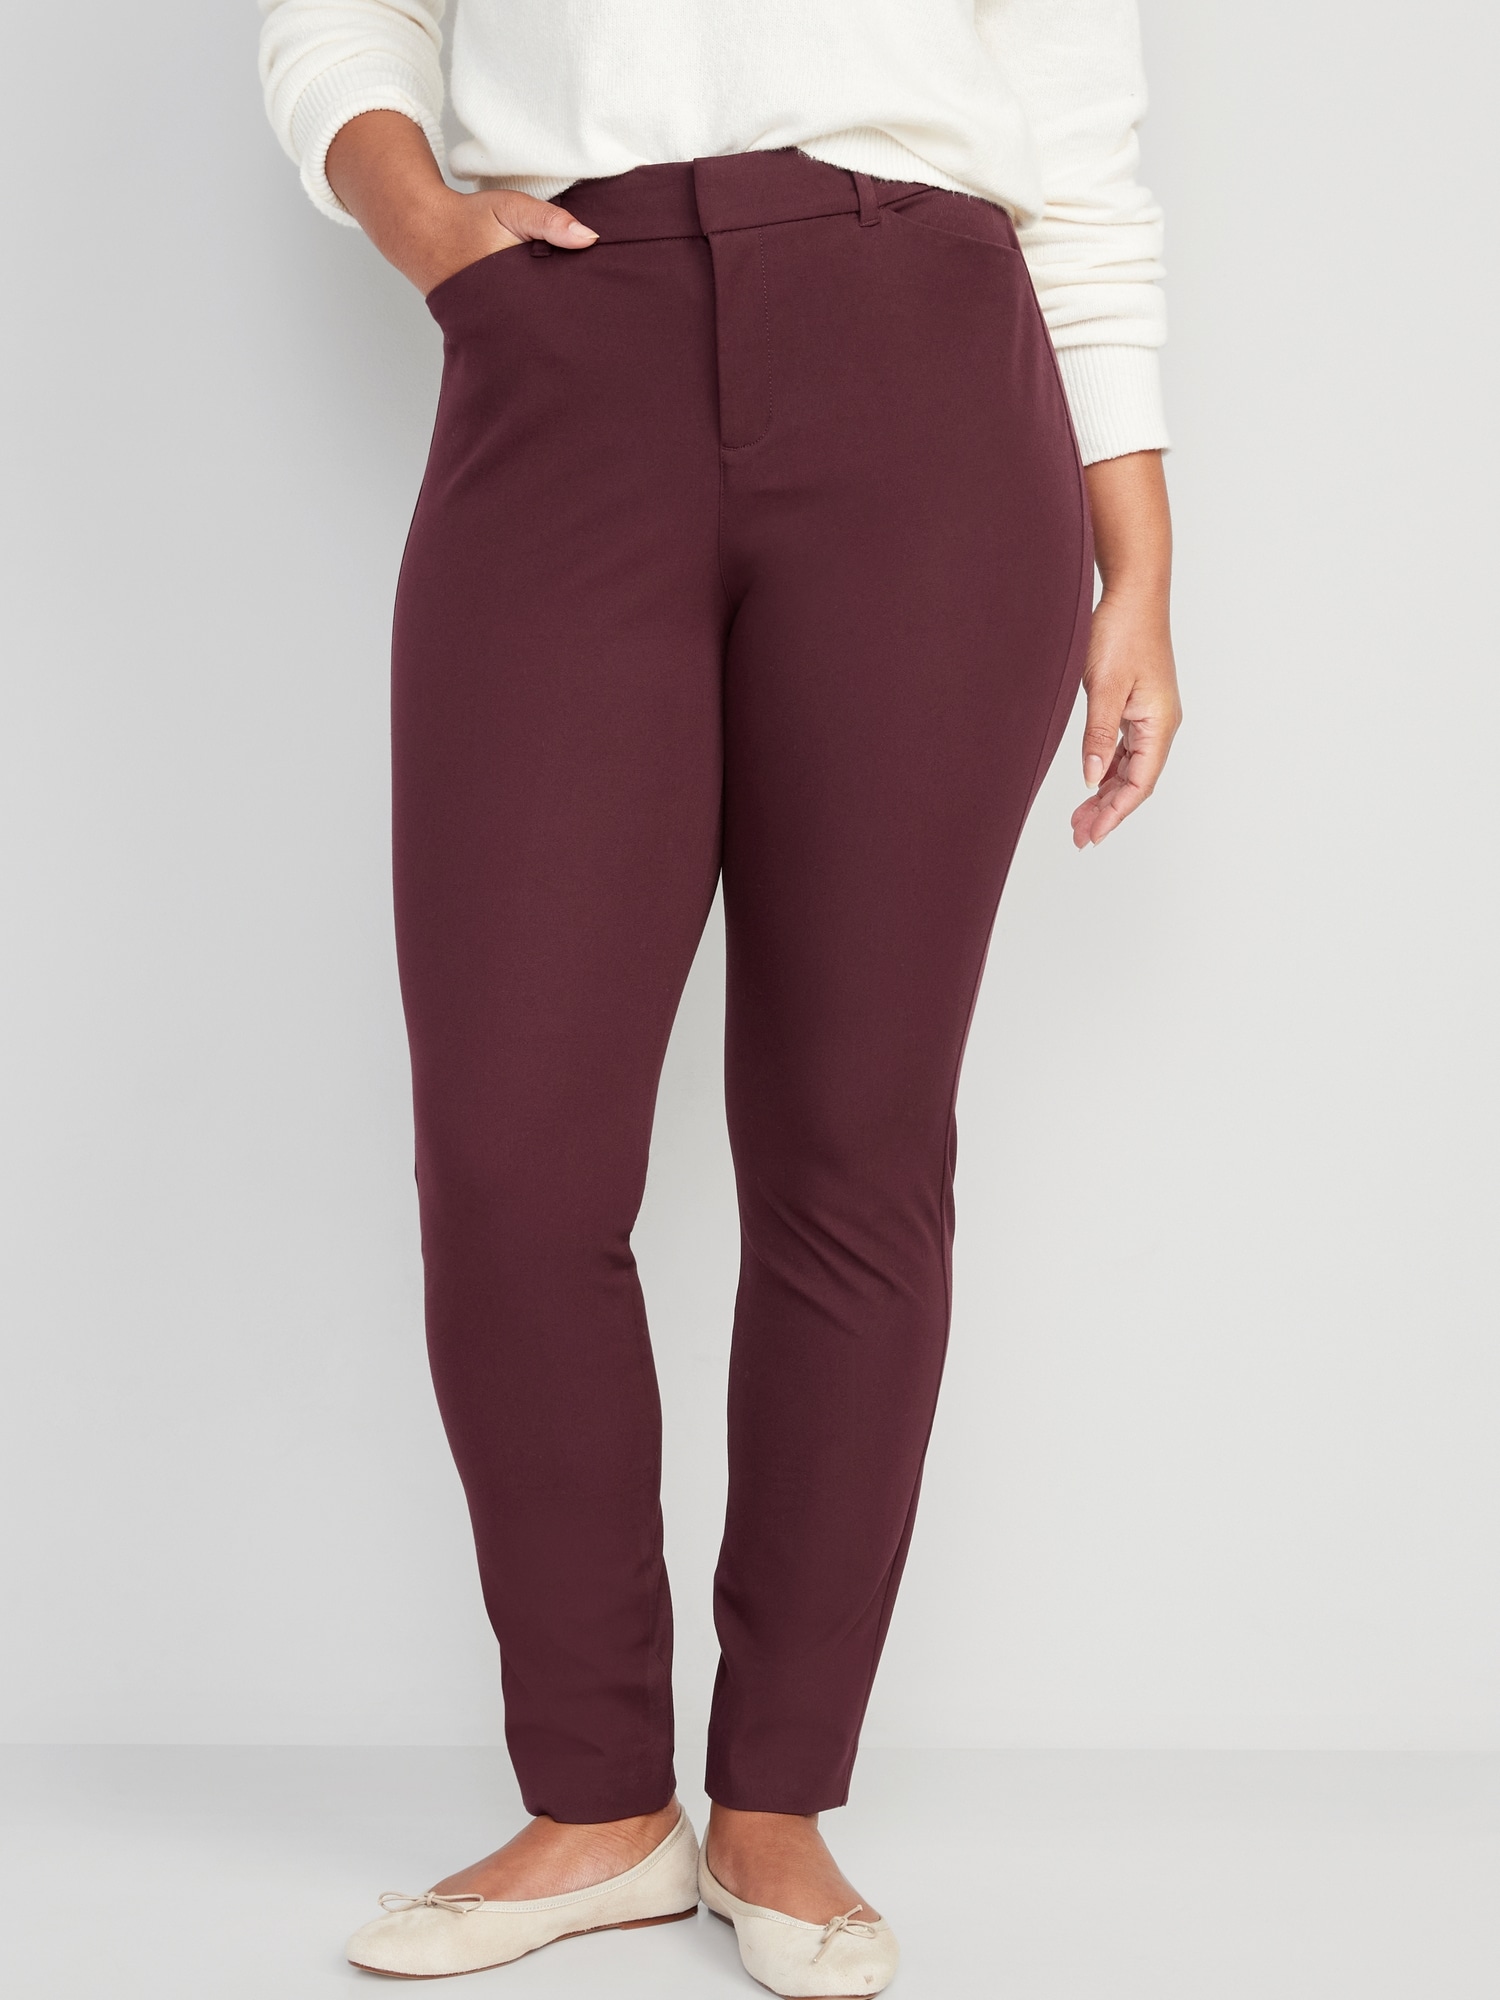 High-Waisted Pixie Skinny Pants | Old Navy